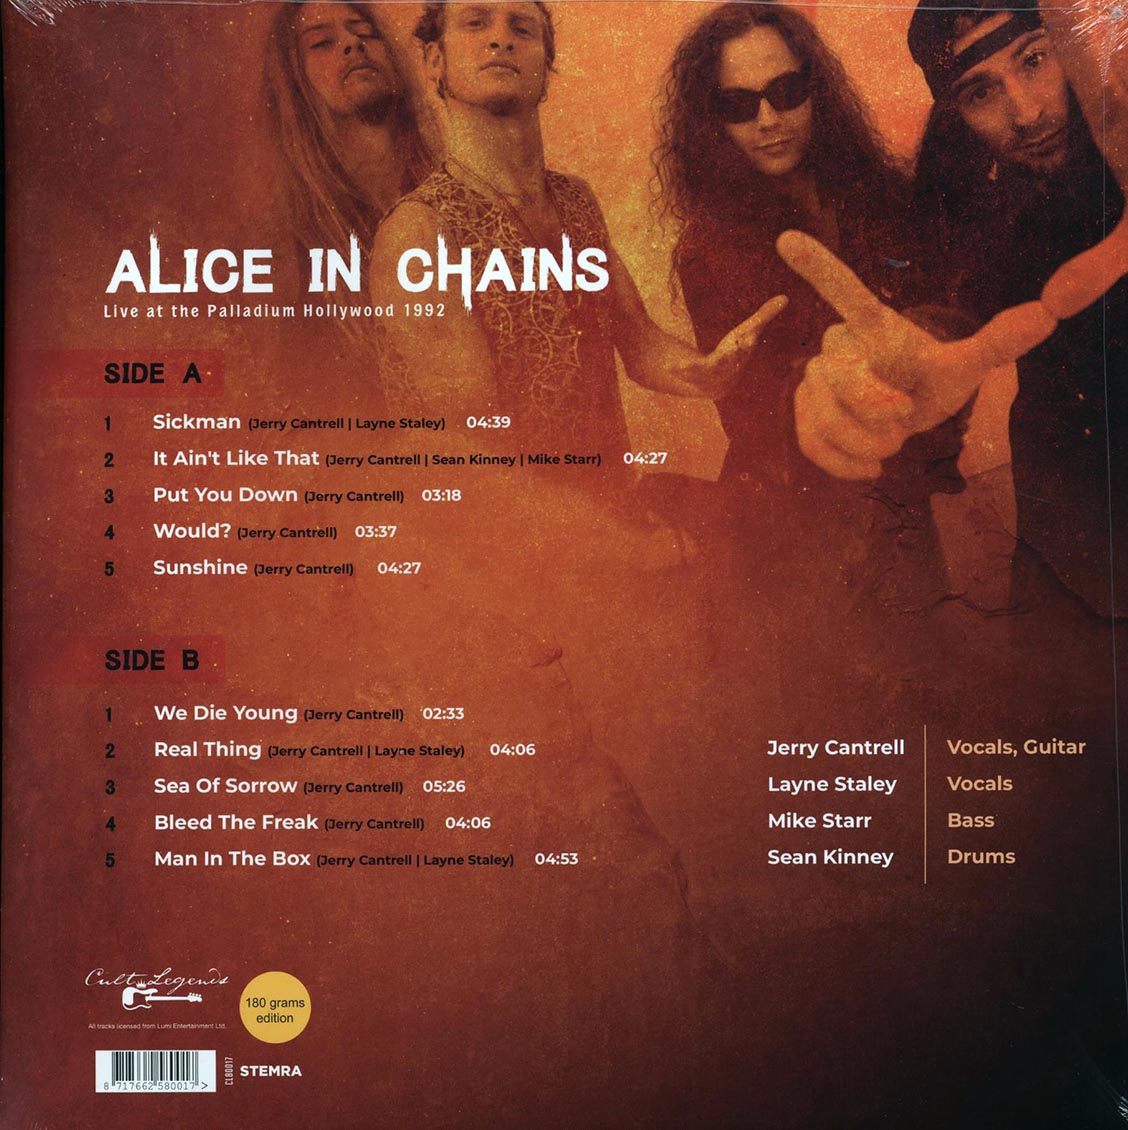 Alice In Chains - Live At The Palladium Hollywood 1992 - Vinyl LP, LP